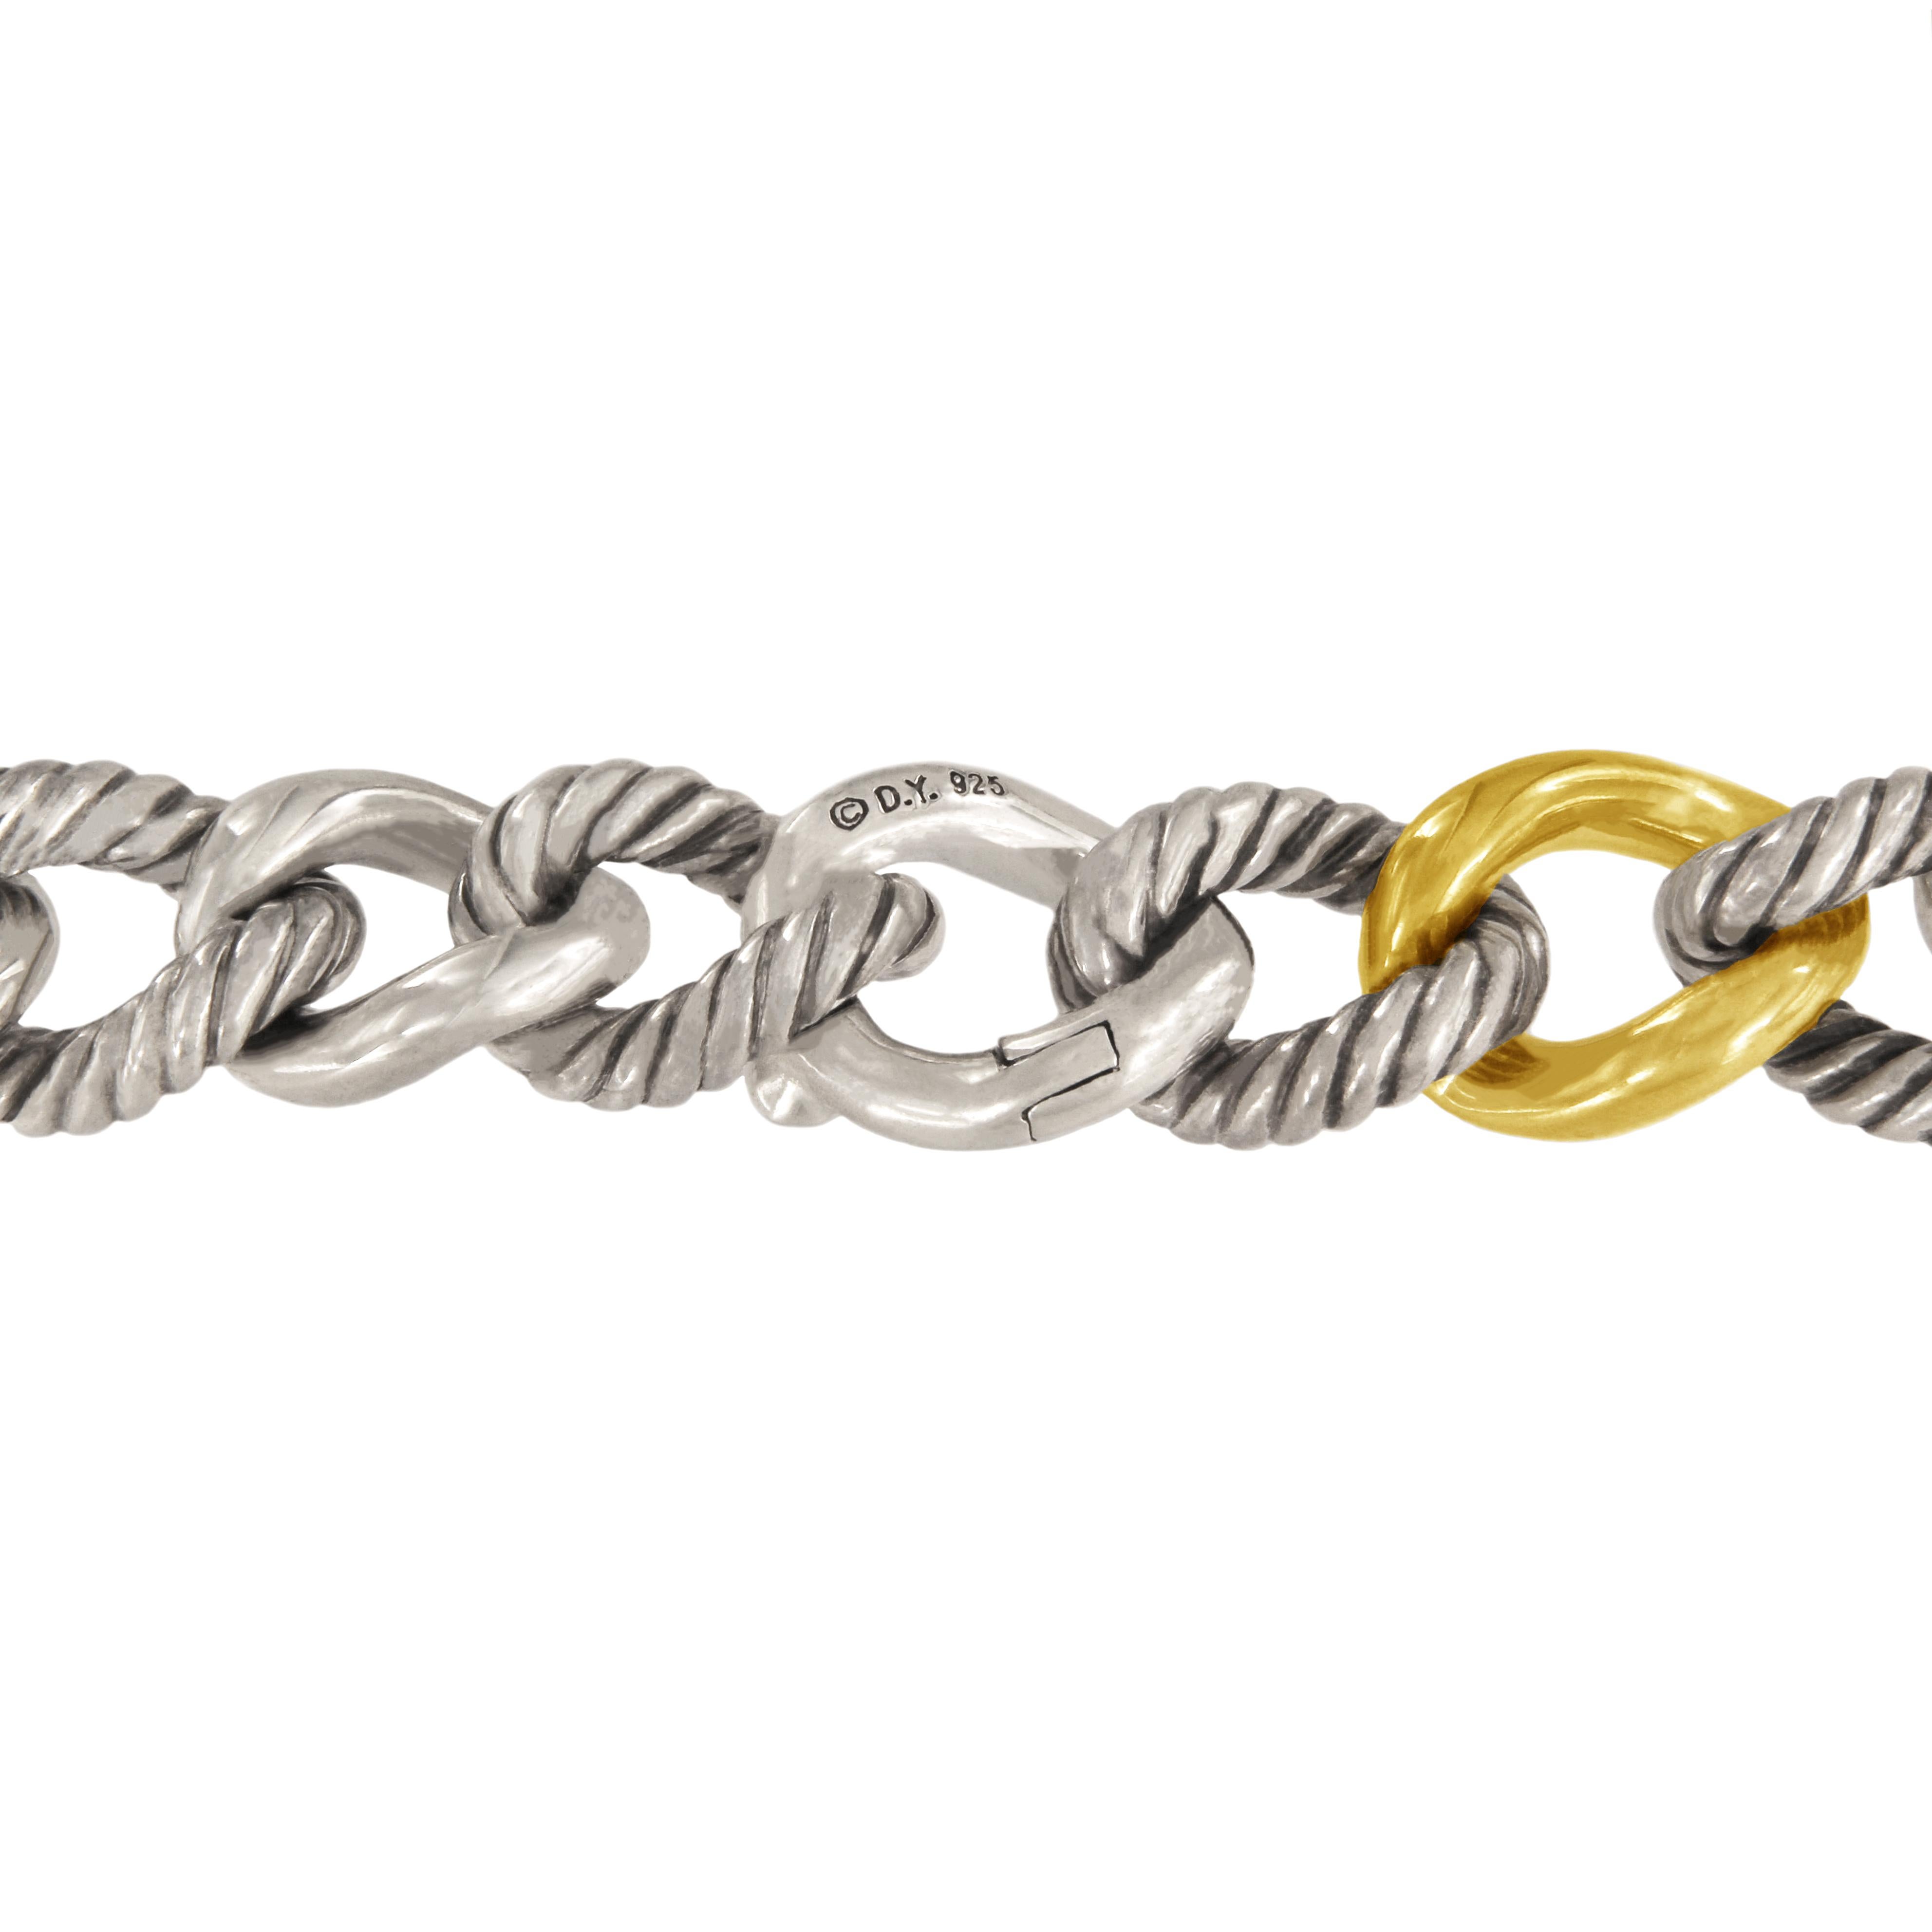 -Sterling silver 925, ¼ 750 Yellow Gold

-Length: 16”

-Link: 10.7mm

-Weight: 96 gr

*Original Retail: $1950